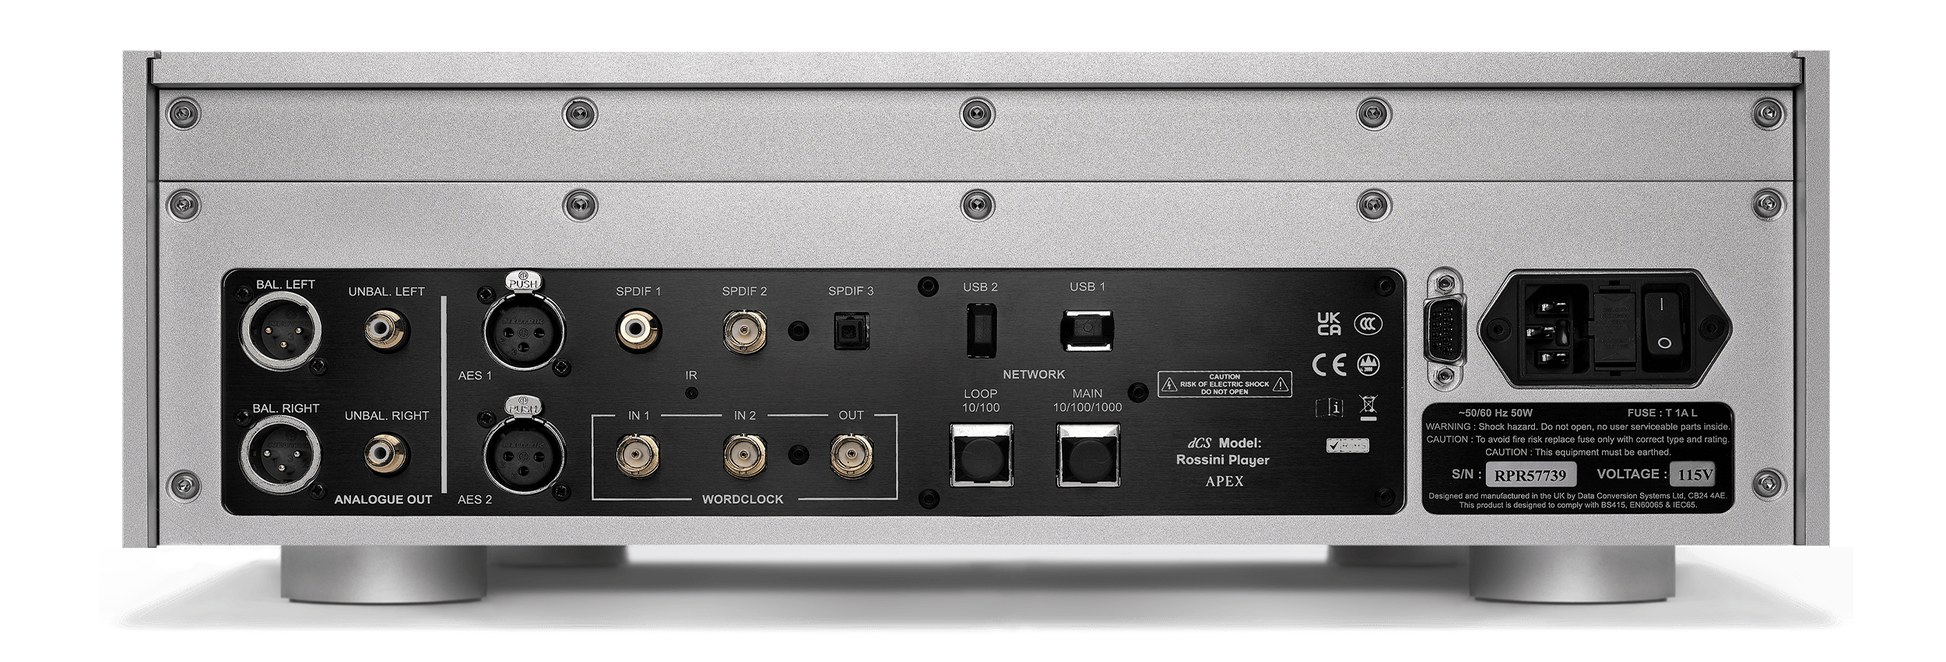 An esteemed cohort to our renowned Vivaldi system, it features our proprietary Ring DAC system, digital processing platform, and clocking architecture - a combination of hardware and software that is unrivalled in its sonic and technical performance.